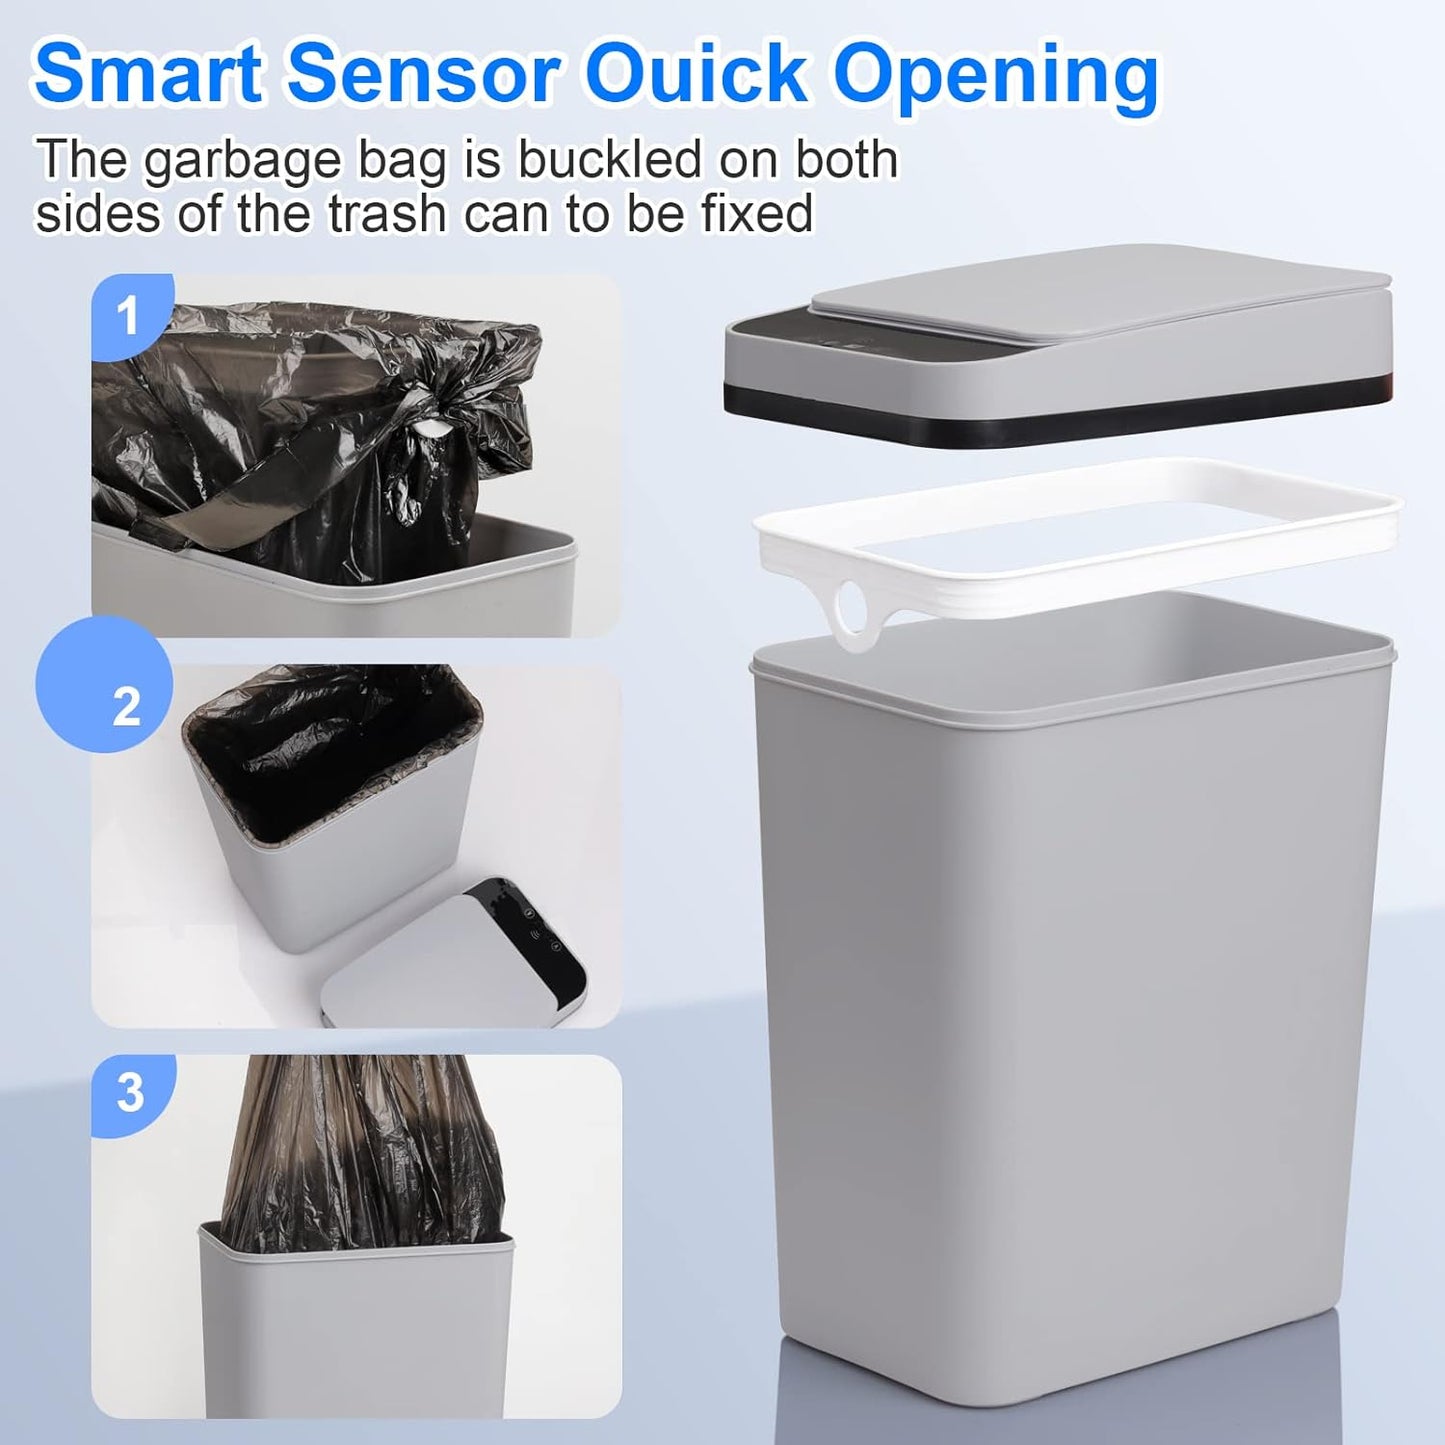 Smart contactless Trash Can